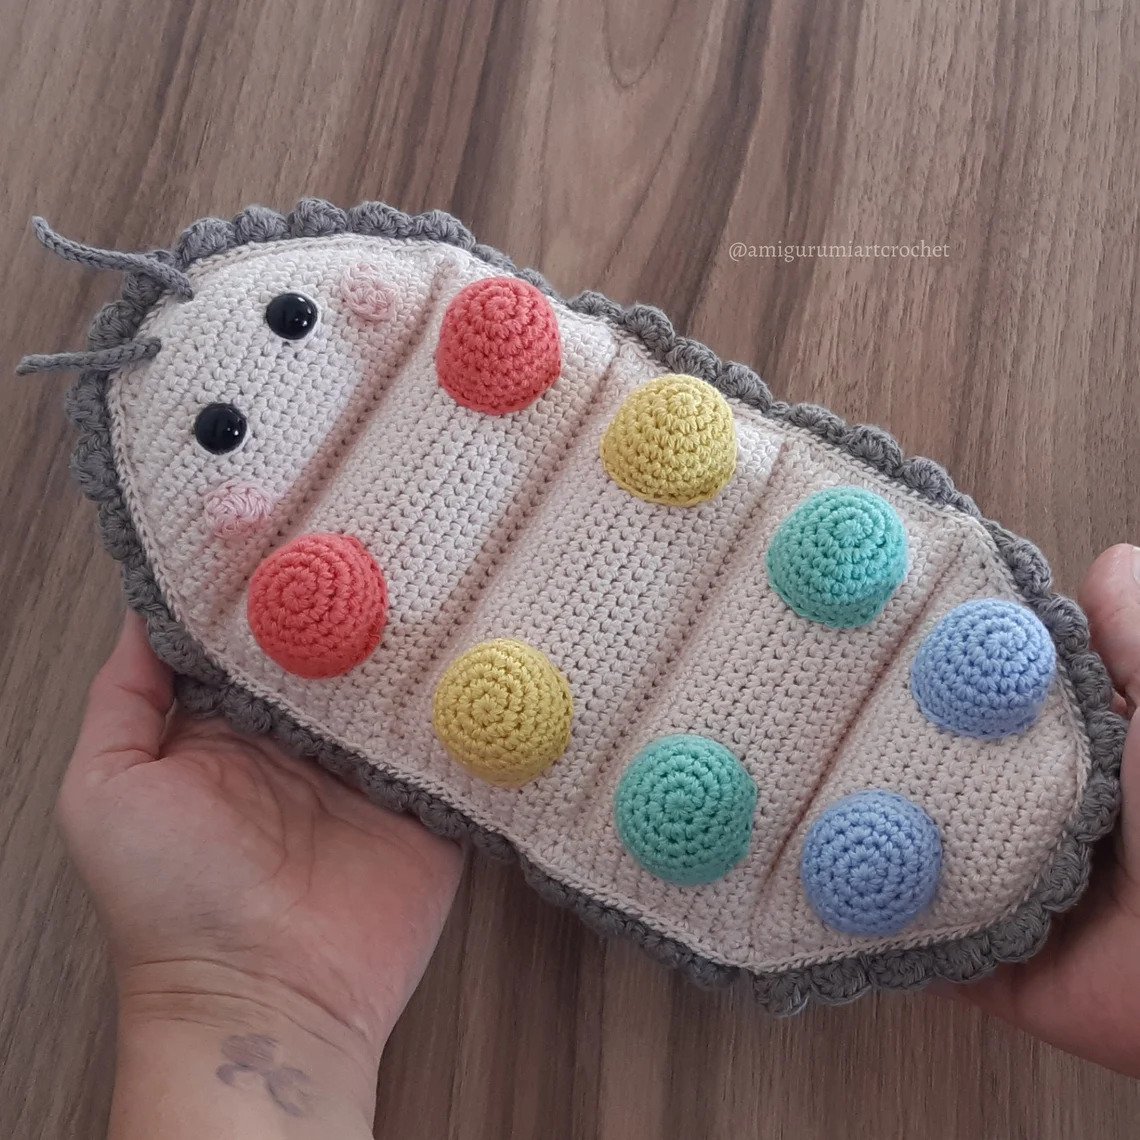 Pillbug, Roly-Poly, Potato Bug ... No Matter What YOU Call It, We All Crochet Them The Same ...